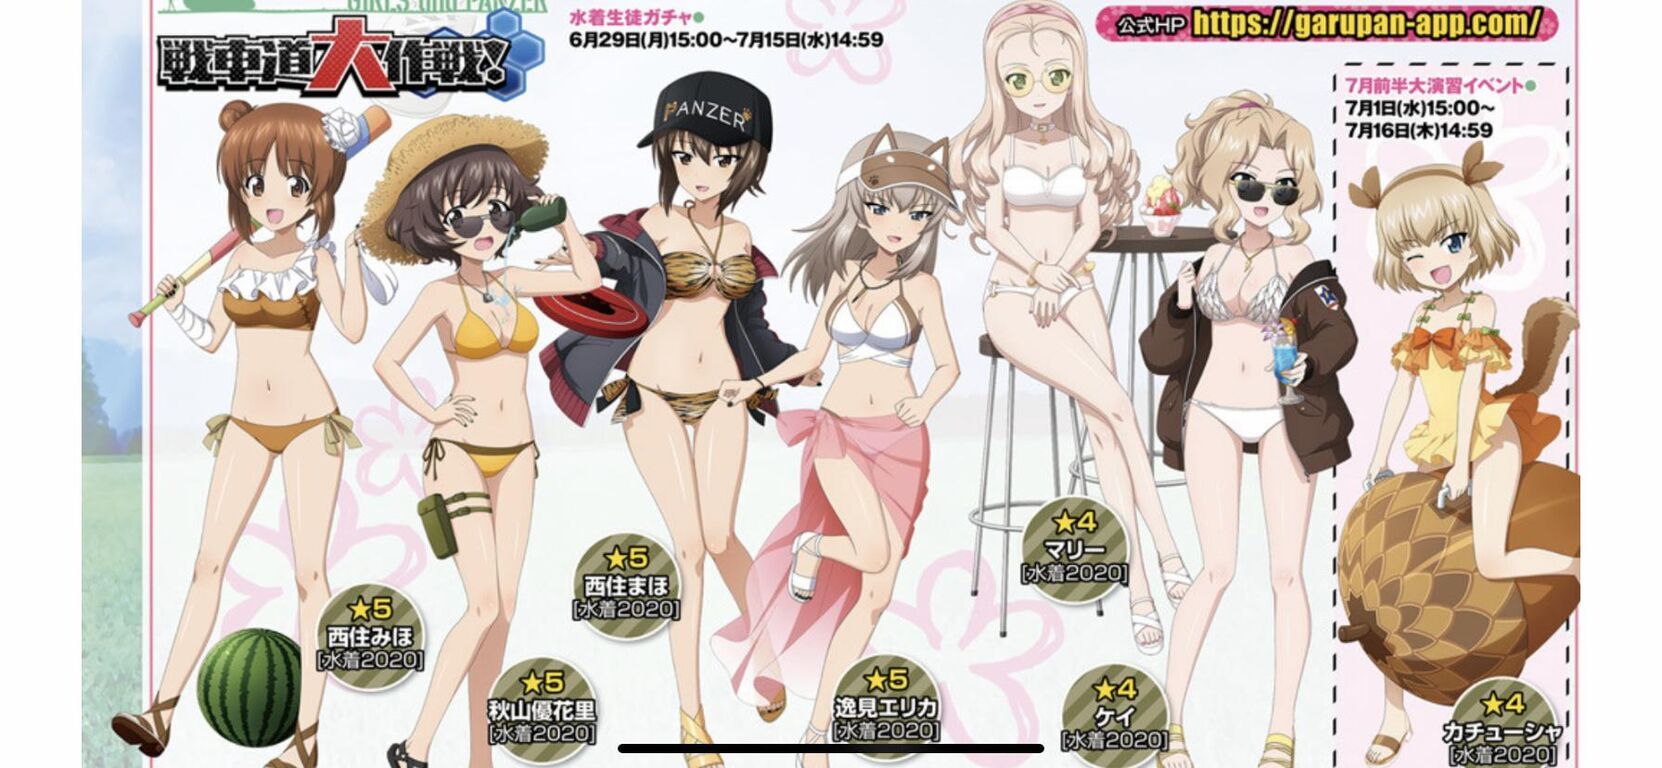 [Image large amount] Echiechi swimsuit of the girl of Garpan is maji two-dimensional sex lady www www 7